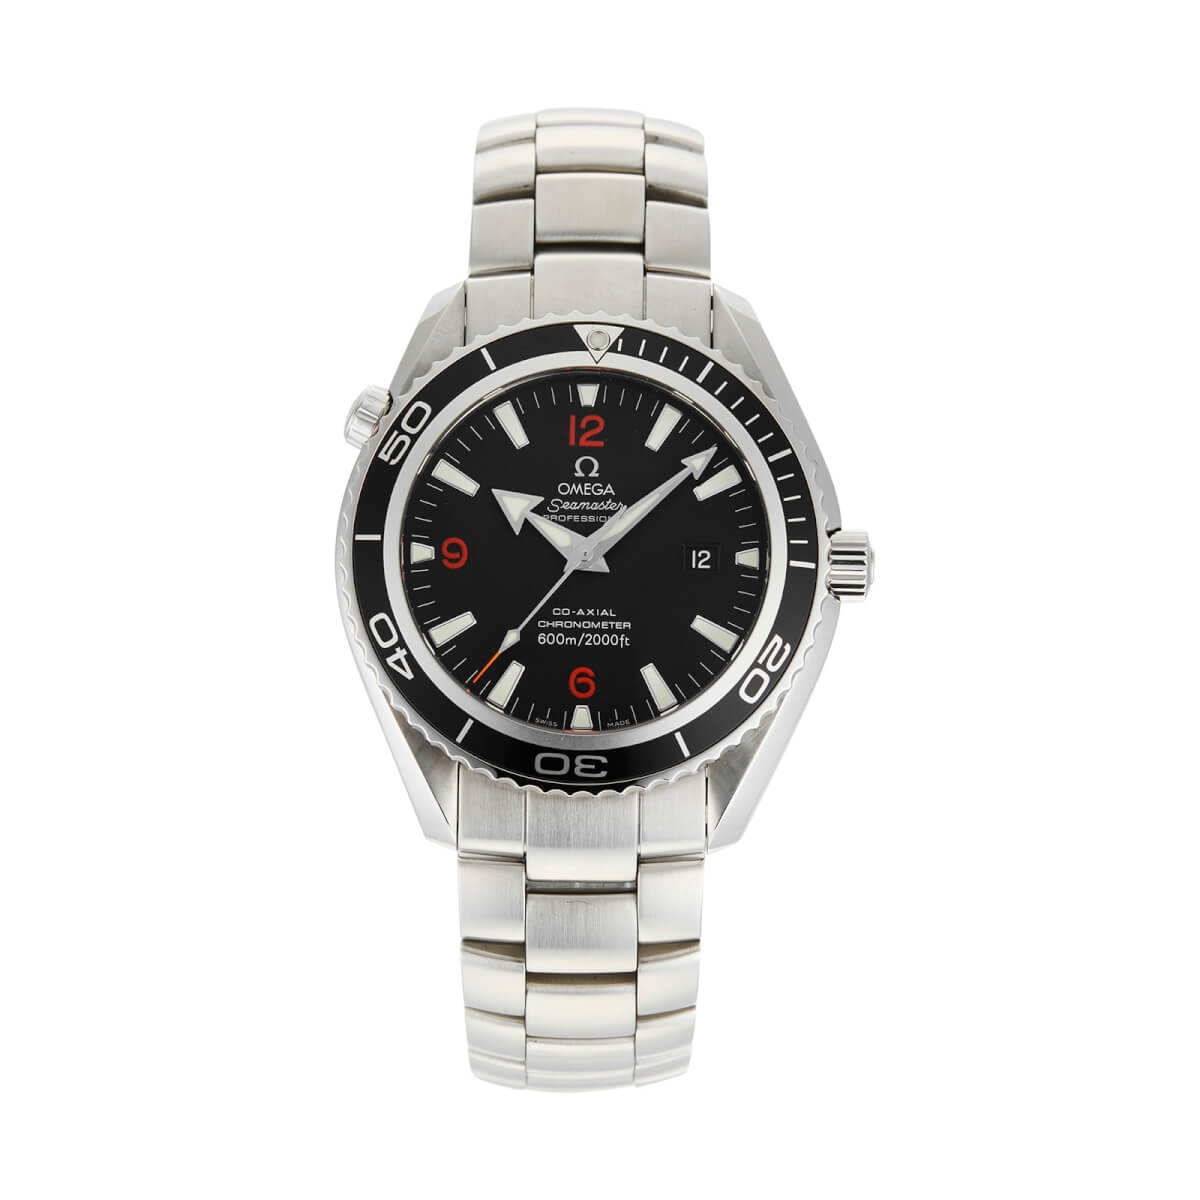 Pre-Owned OMEGA Seamaster Planet Ocean 600M Mens Watch 2200.51.00